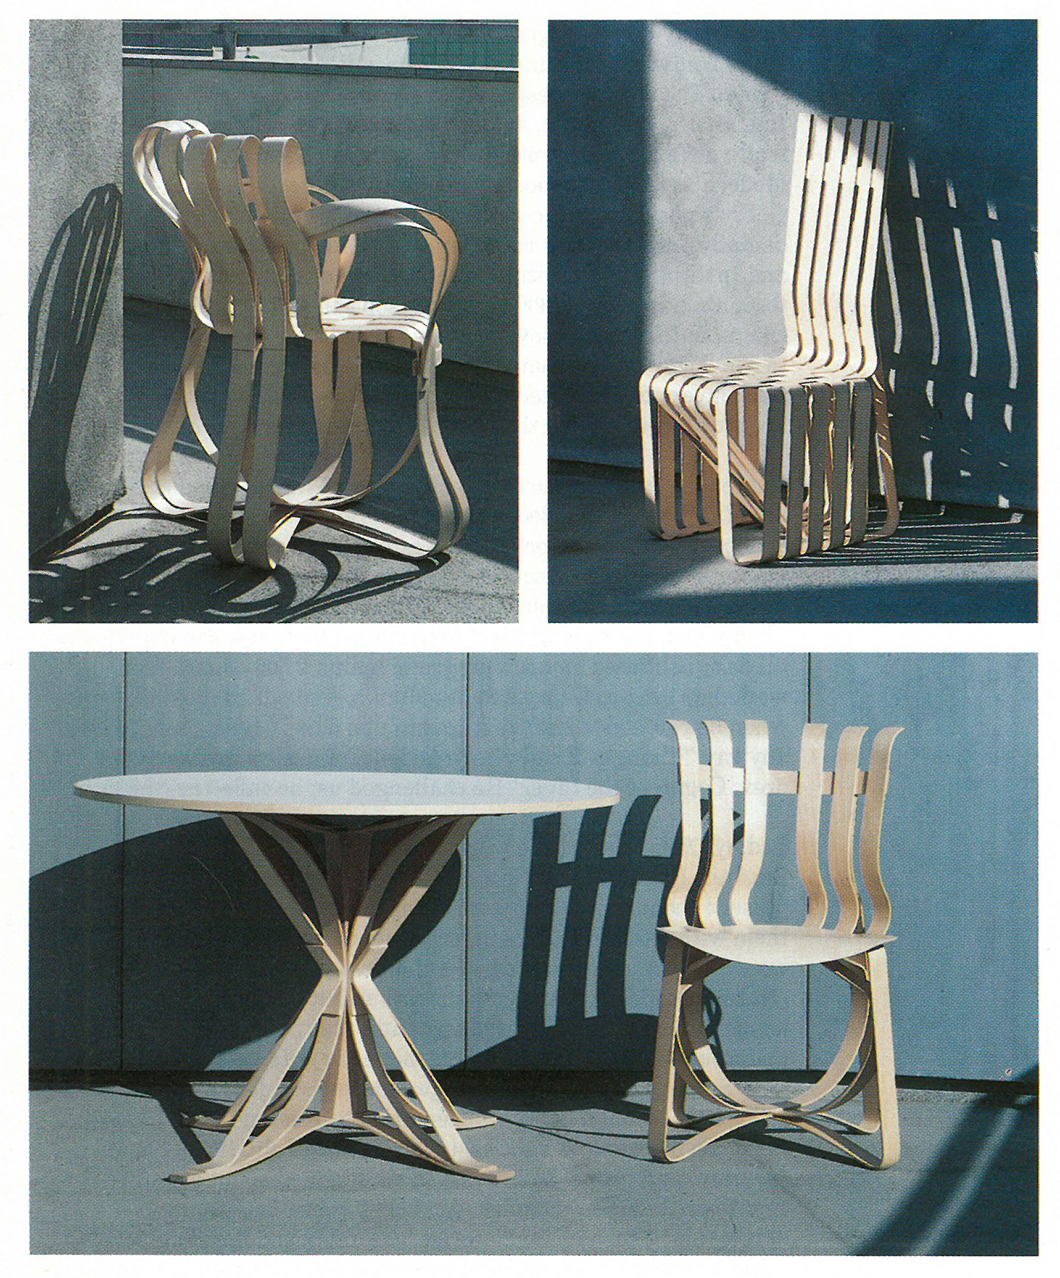 The Bentwood Collection by Frank Gehry, 1992 | In Conversation with Paul Goldberger | PC: Knoll Archive | Knoll Inspiration